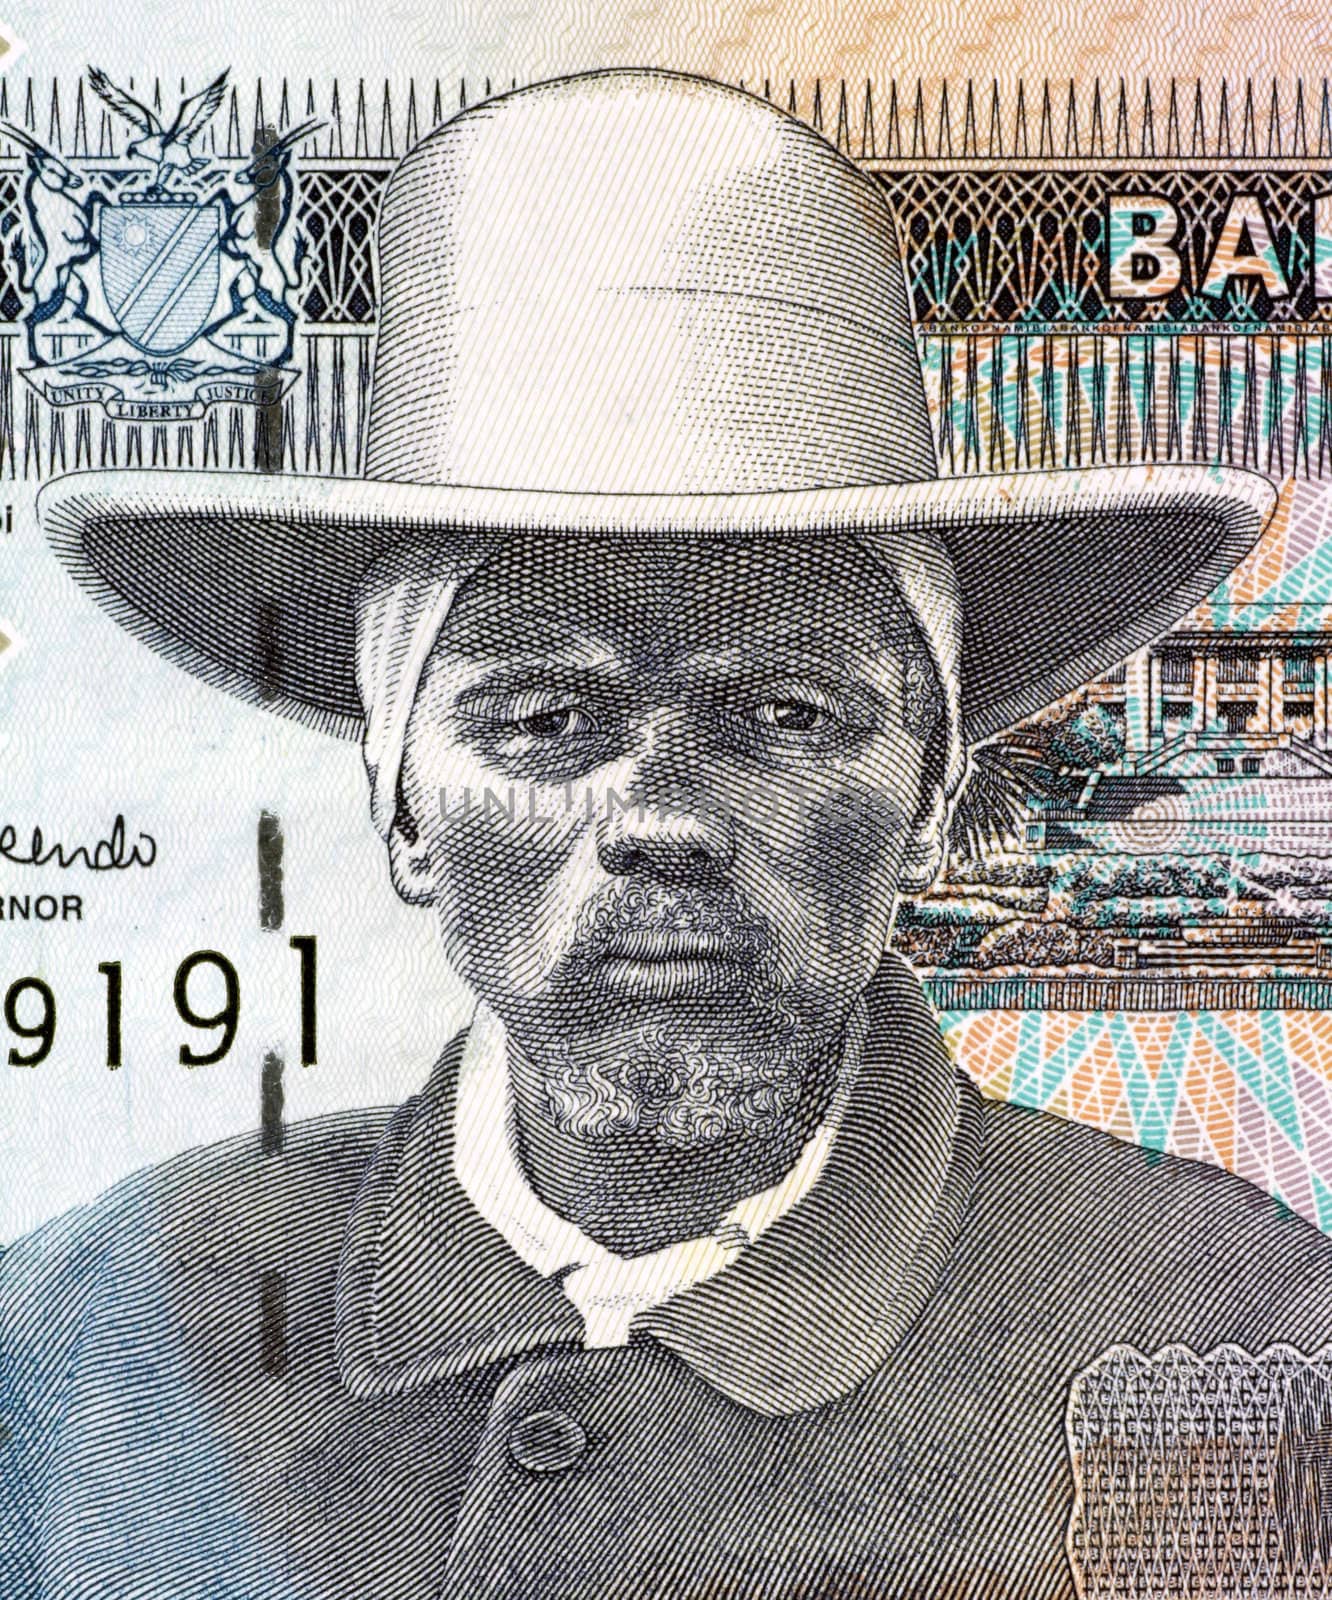 Hendrik Samuel Witbooi (1906-1978) on 10 Dollars 2001 Banknote from Namibia.  6th Kaptein of the IKhowesin, a subtribe of the Orlam, in Namibia.